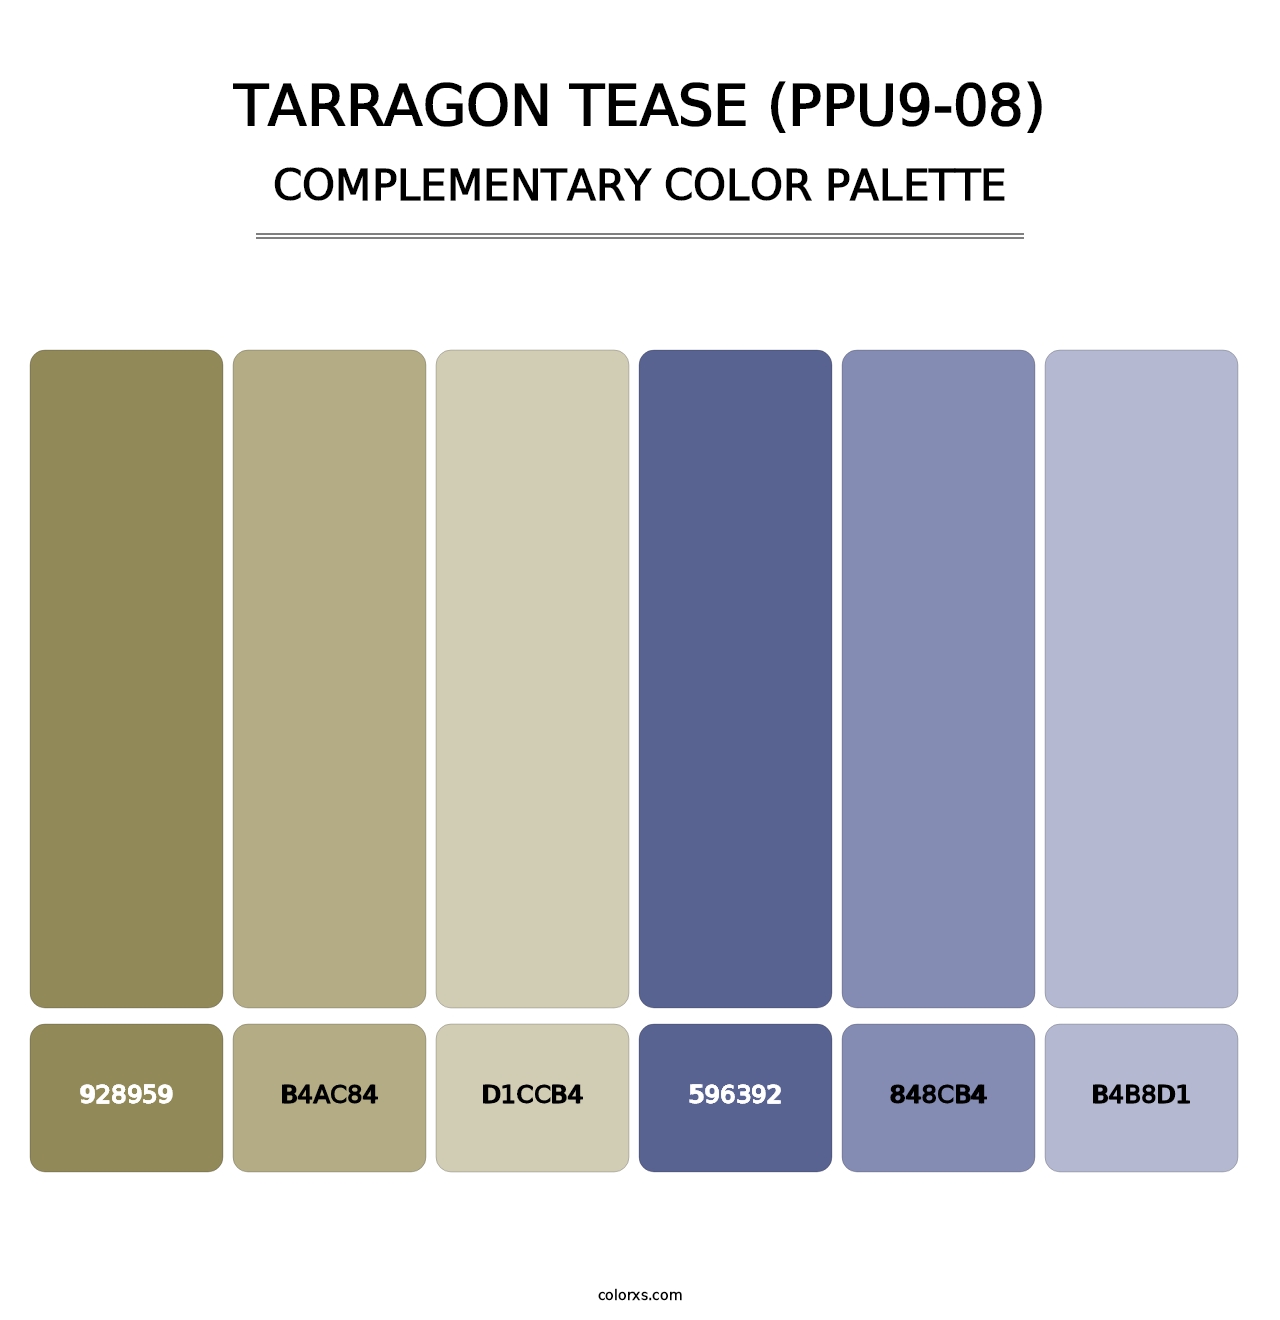 Tarragon Tease (PPU9-08) - Complementary Color Palette